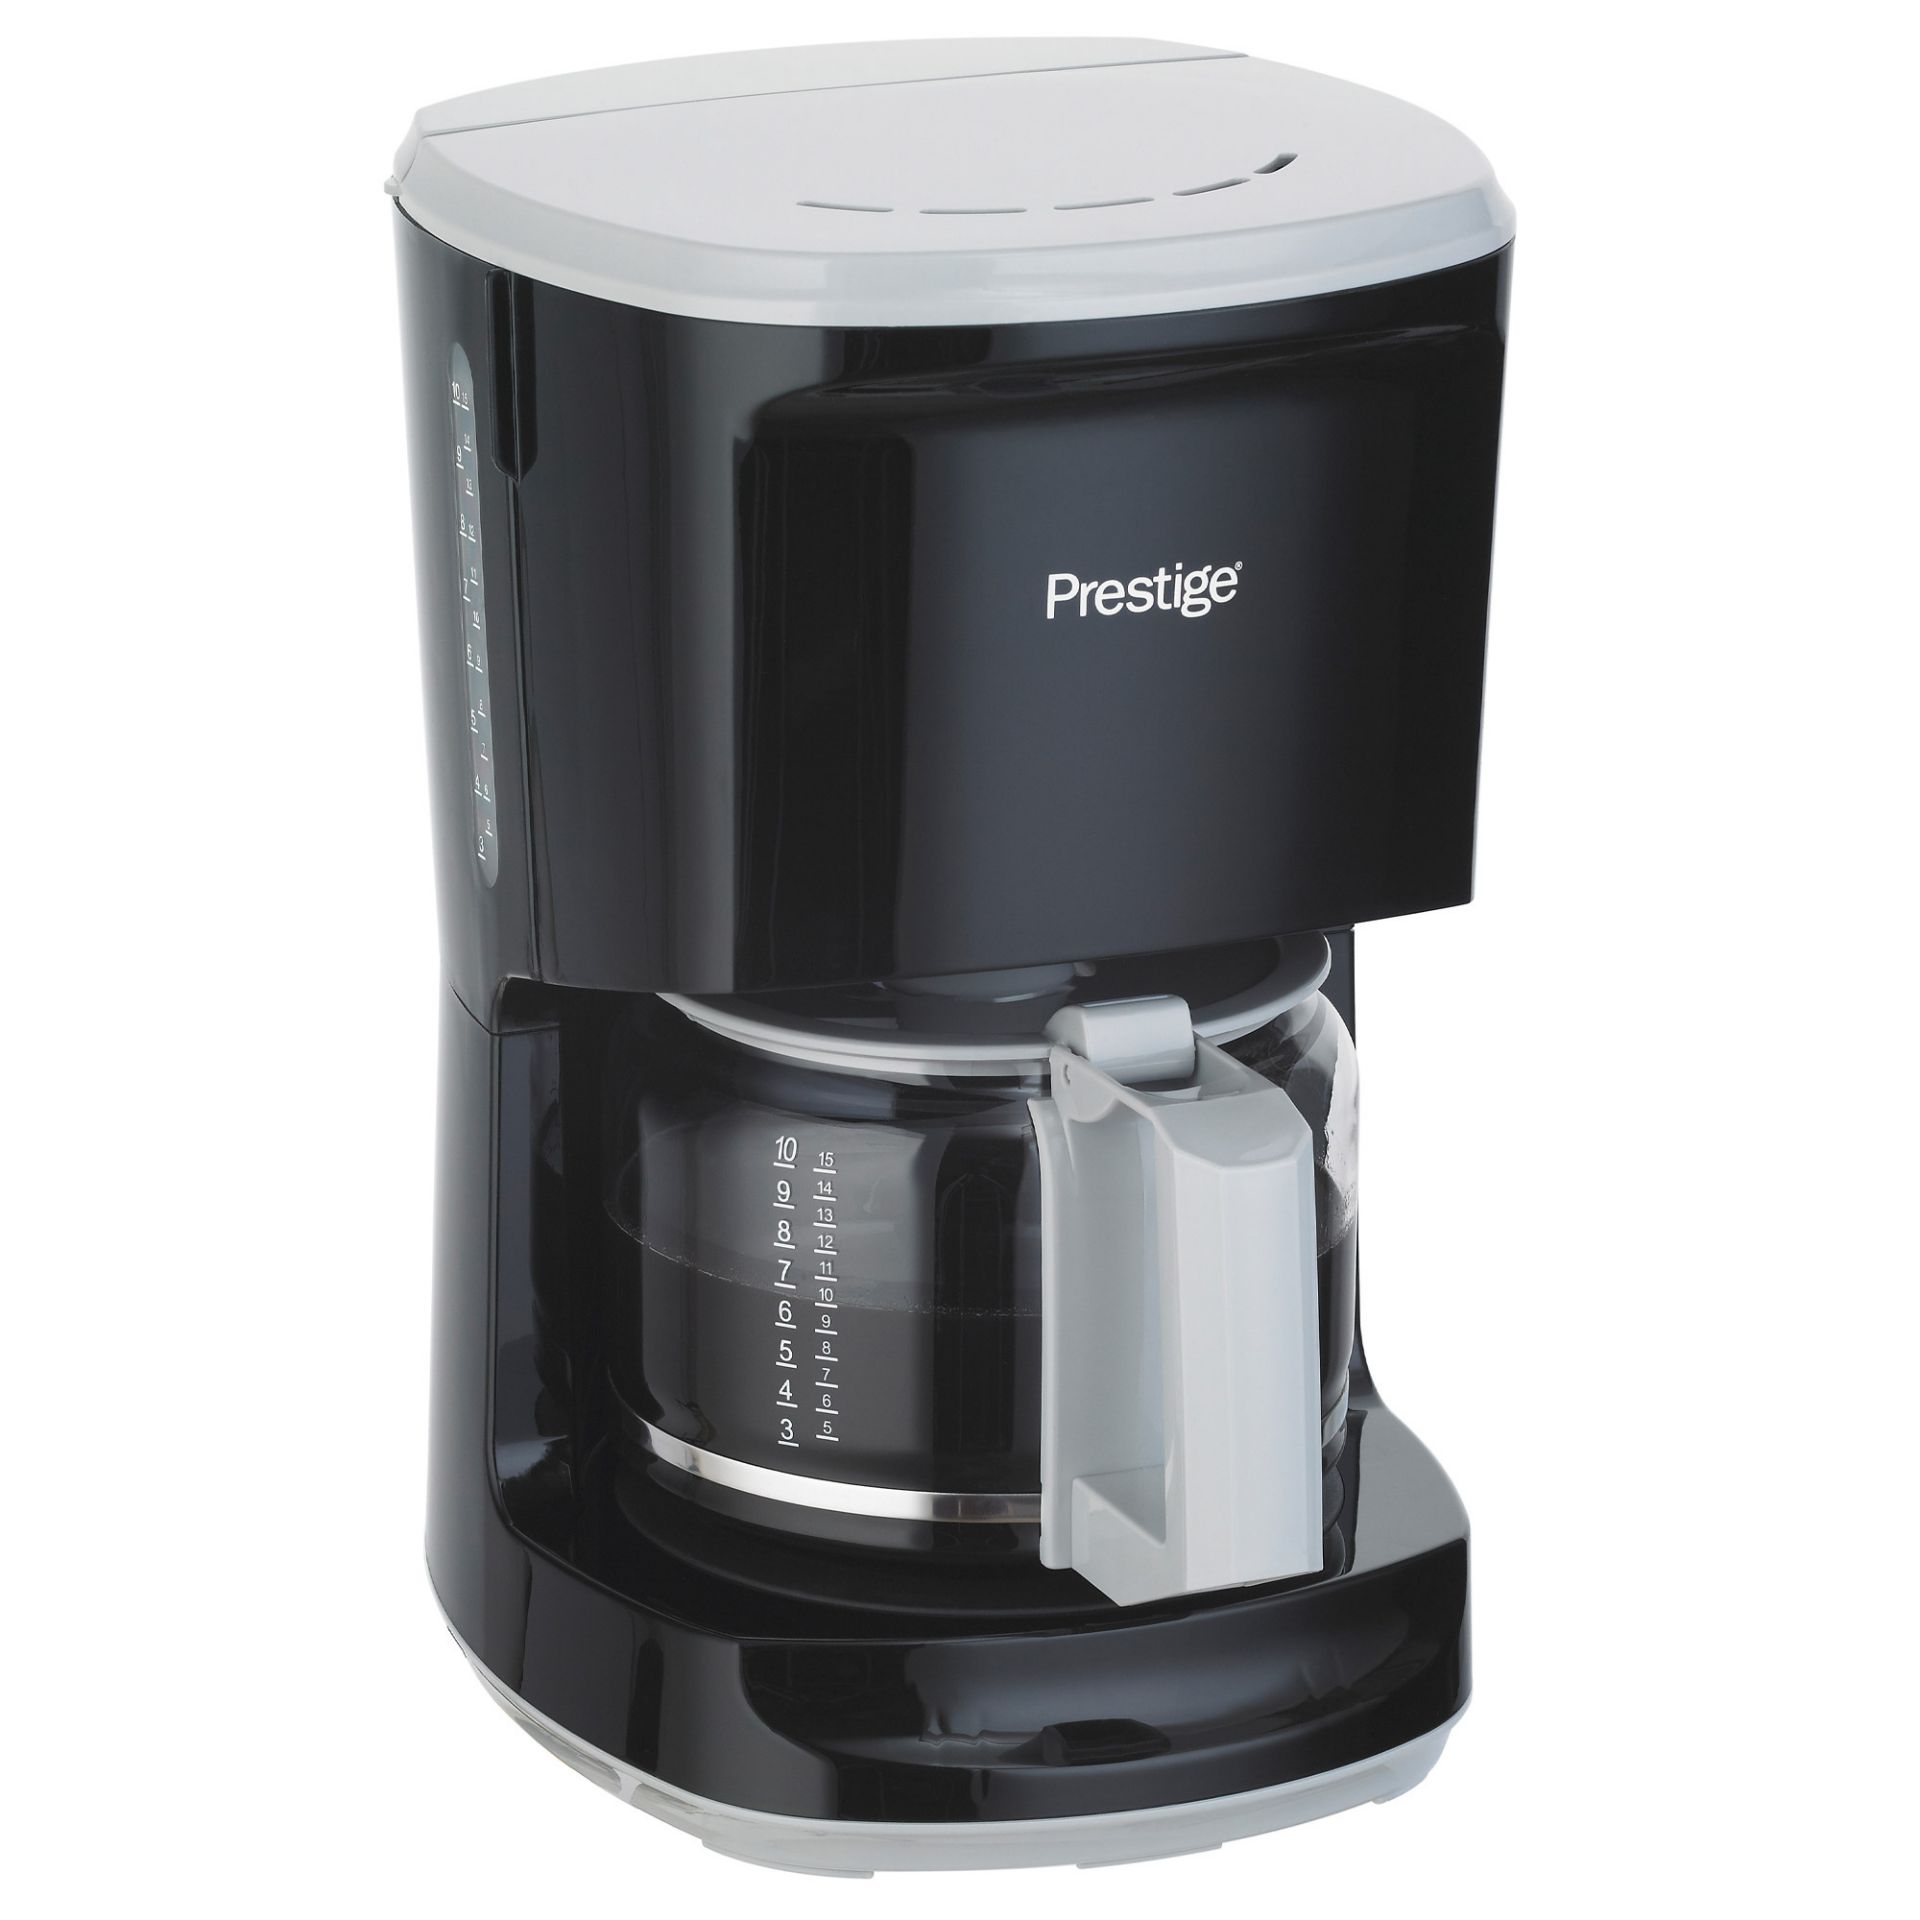 Brand New Prestige Coffee Maker With 10 Cup Capacity